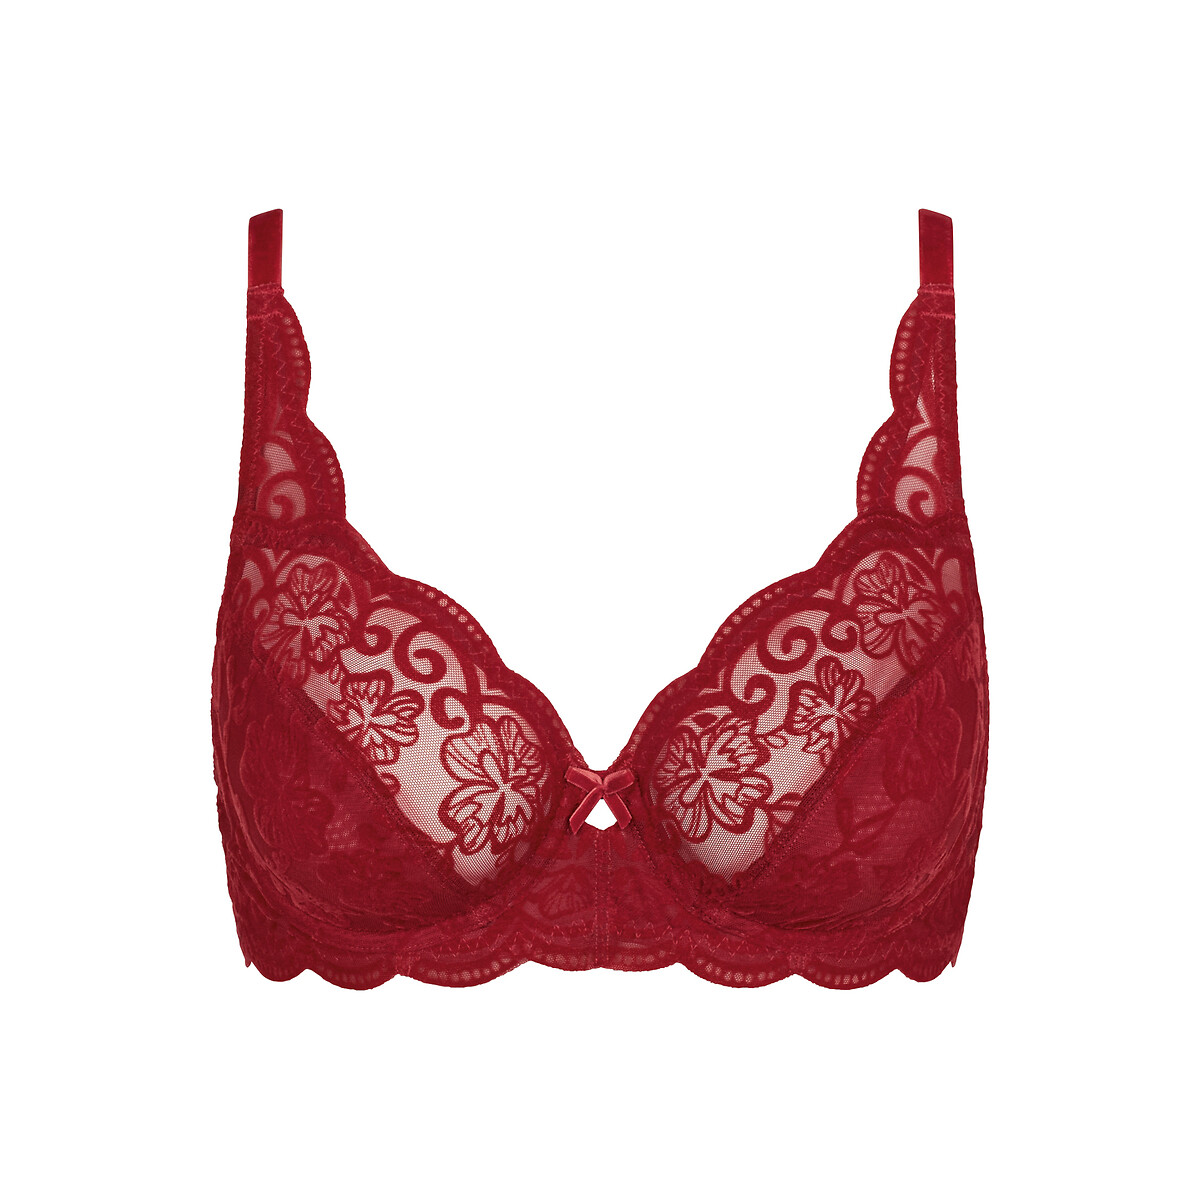 Amourette 300 Rococo Recycled Full Cup Bra